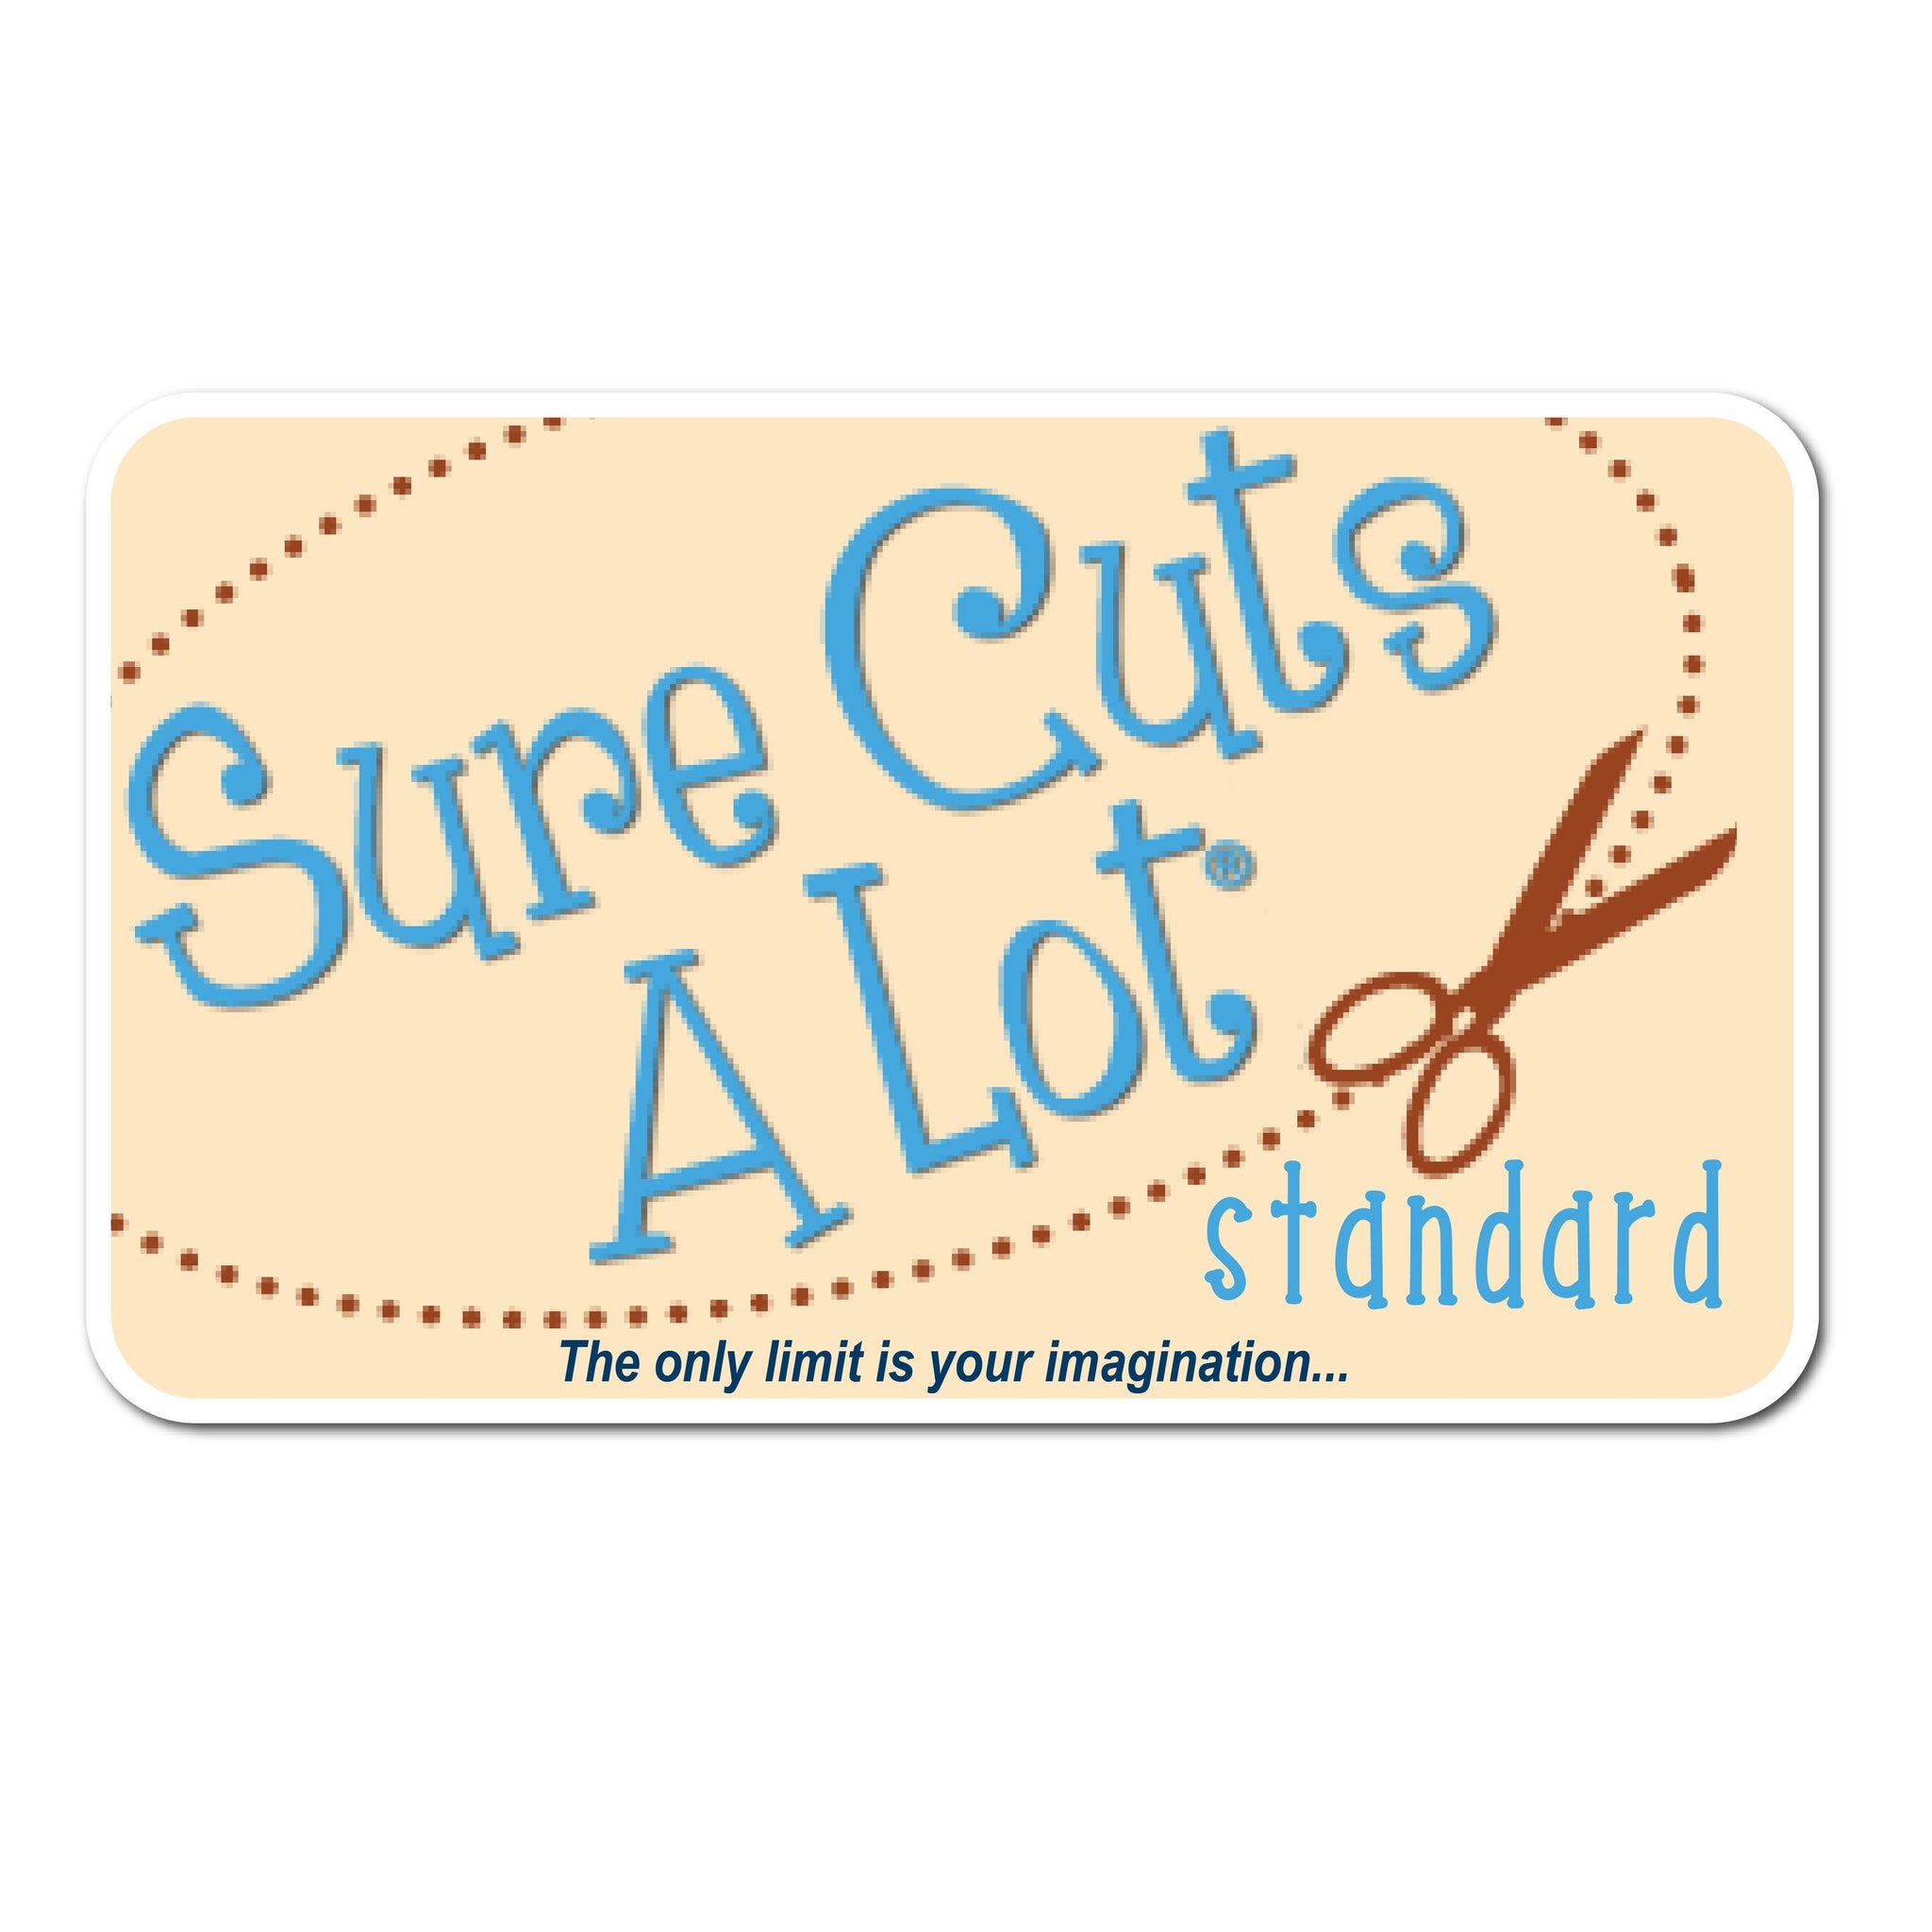 Sure Cuts A Lot Pro 6.039 download the new for ios